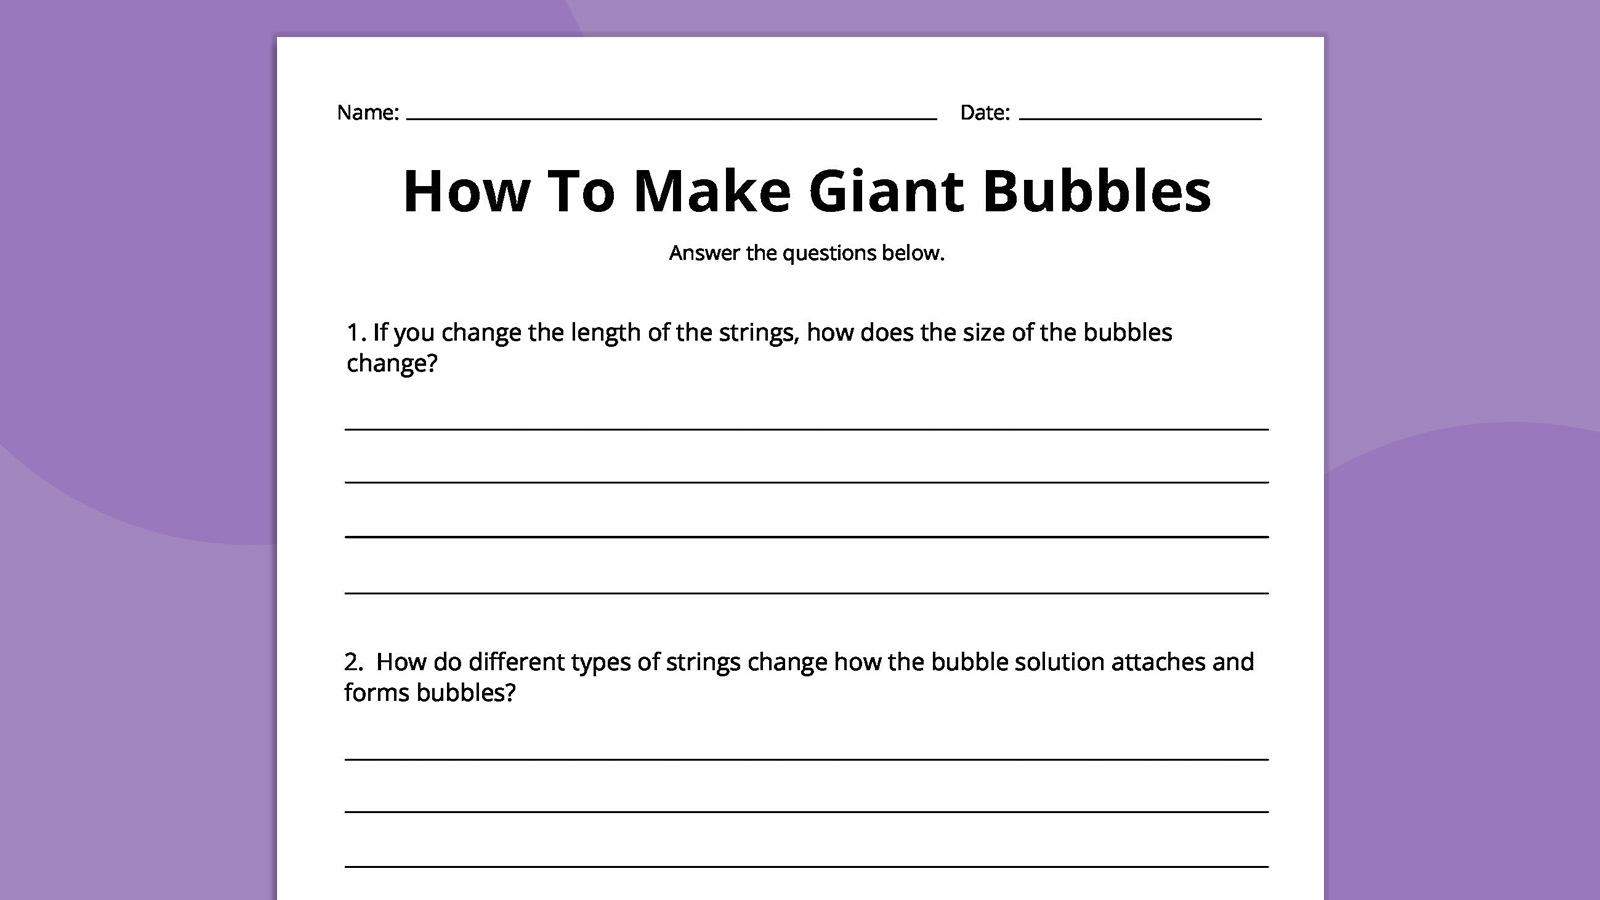 How to Make Giant Bubbles 4